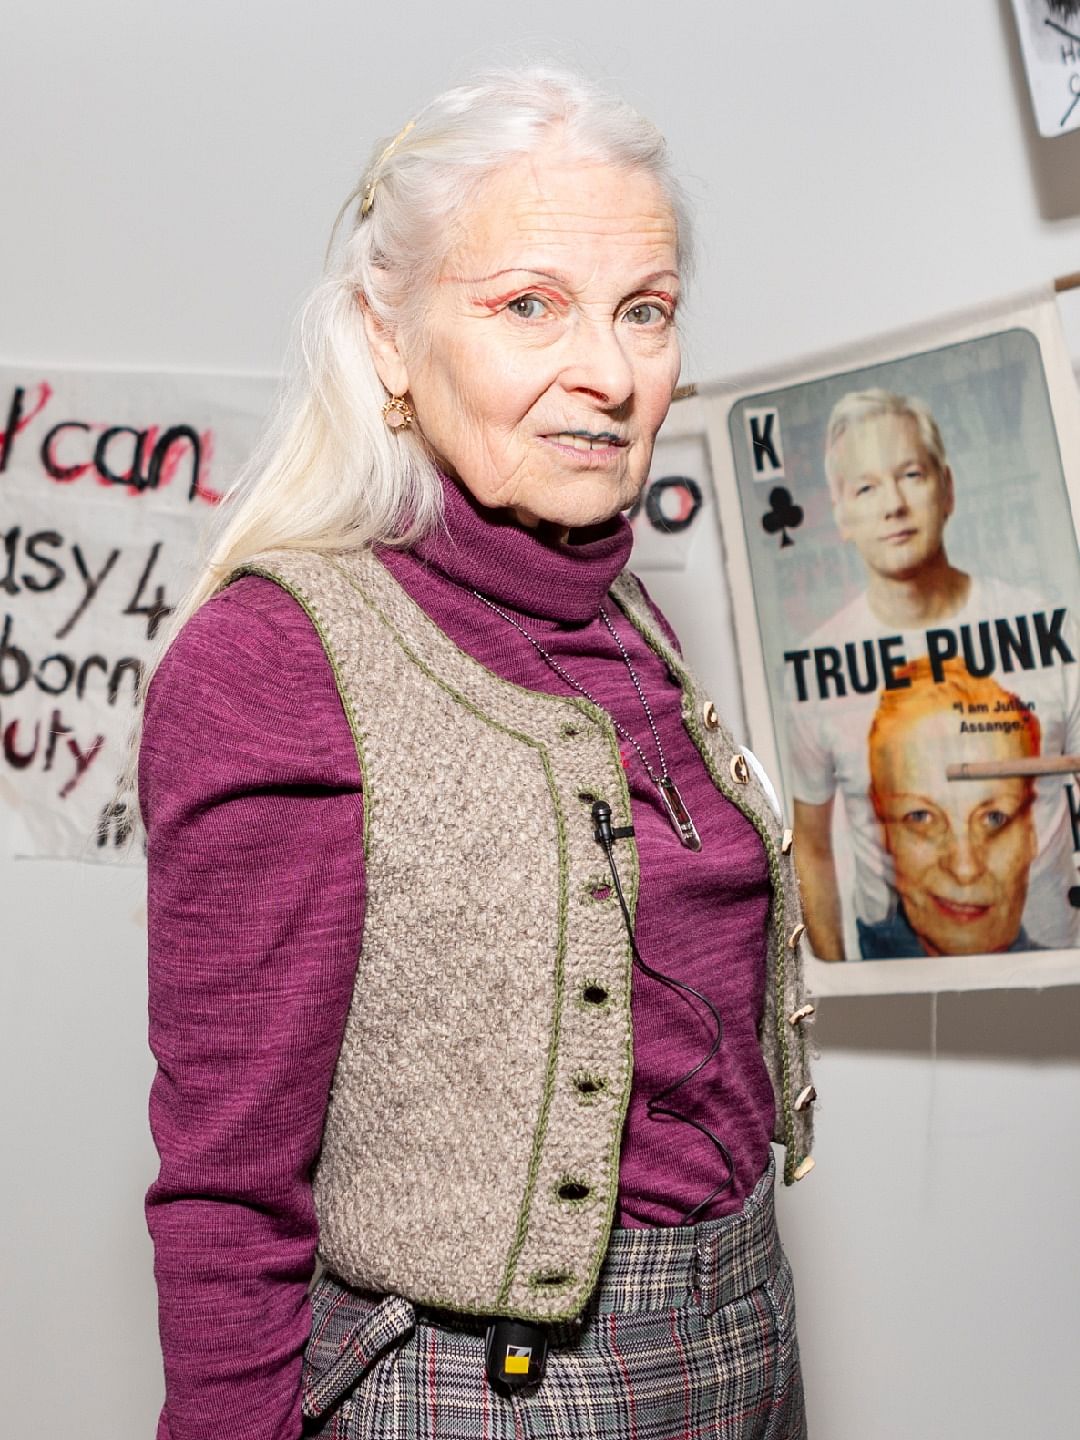 SG's Young Punks And Creatives Remember Vivienne Westwood